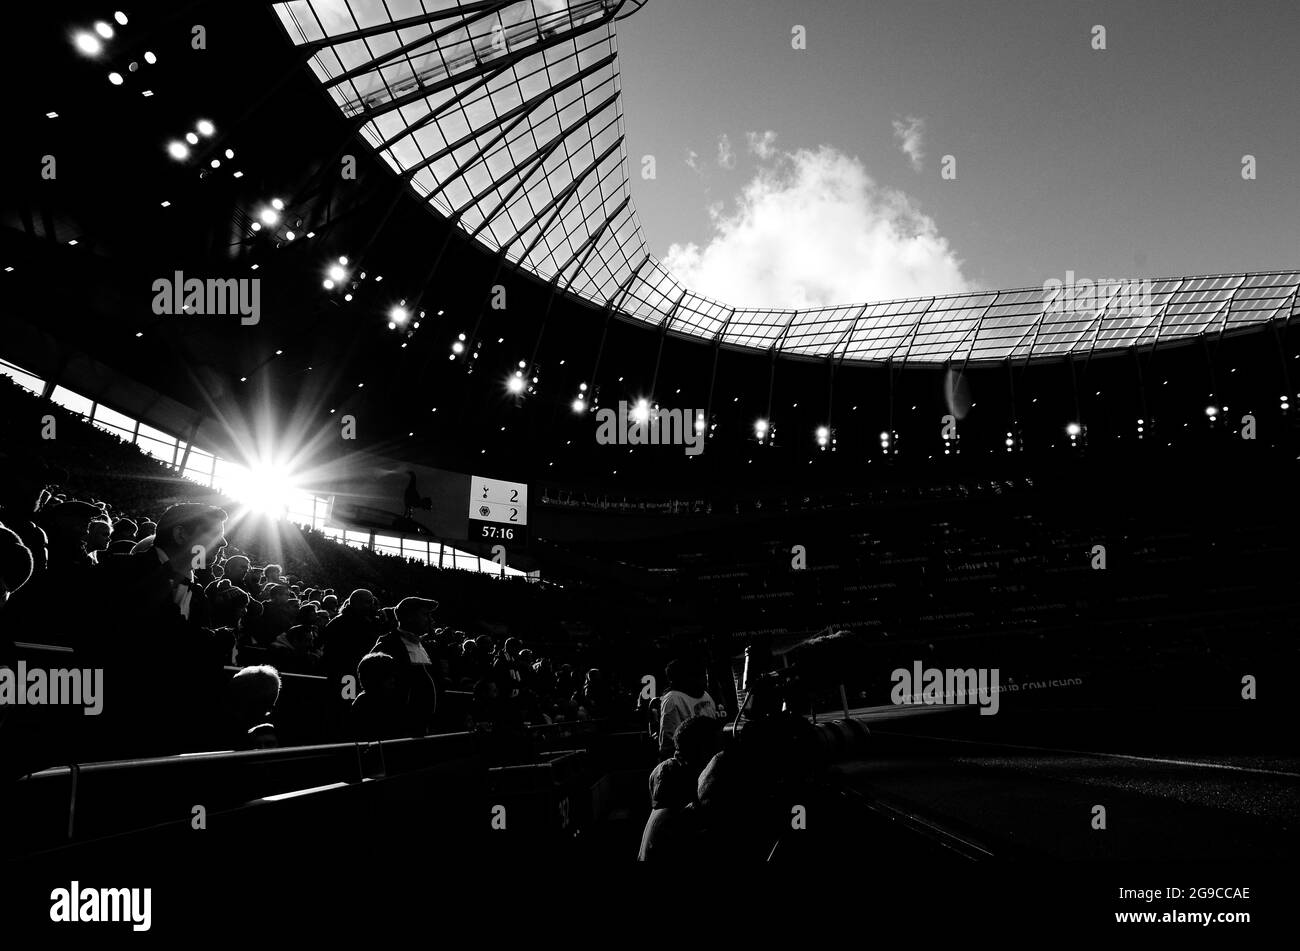 LONDON, ENGLAND - MArch 1, 2020: Silhouettes of fans in the stands of the venue pictured during the 2020/21 Premier League game between Tottenham Hotspur FC and Wolverhampton FC at Tottenham Hotspur Stadium. Stock Photo